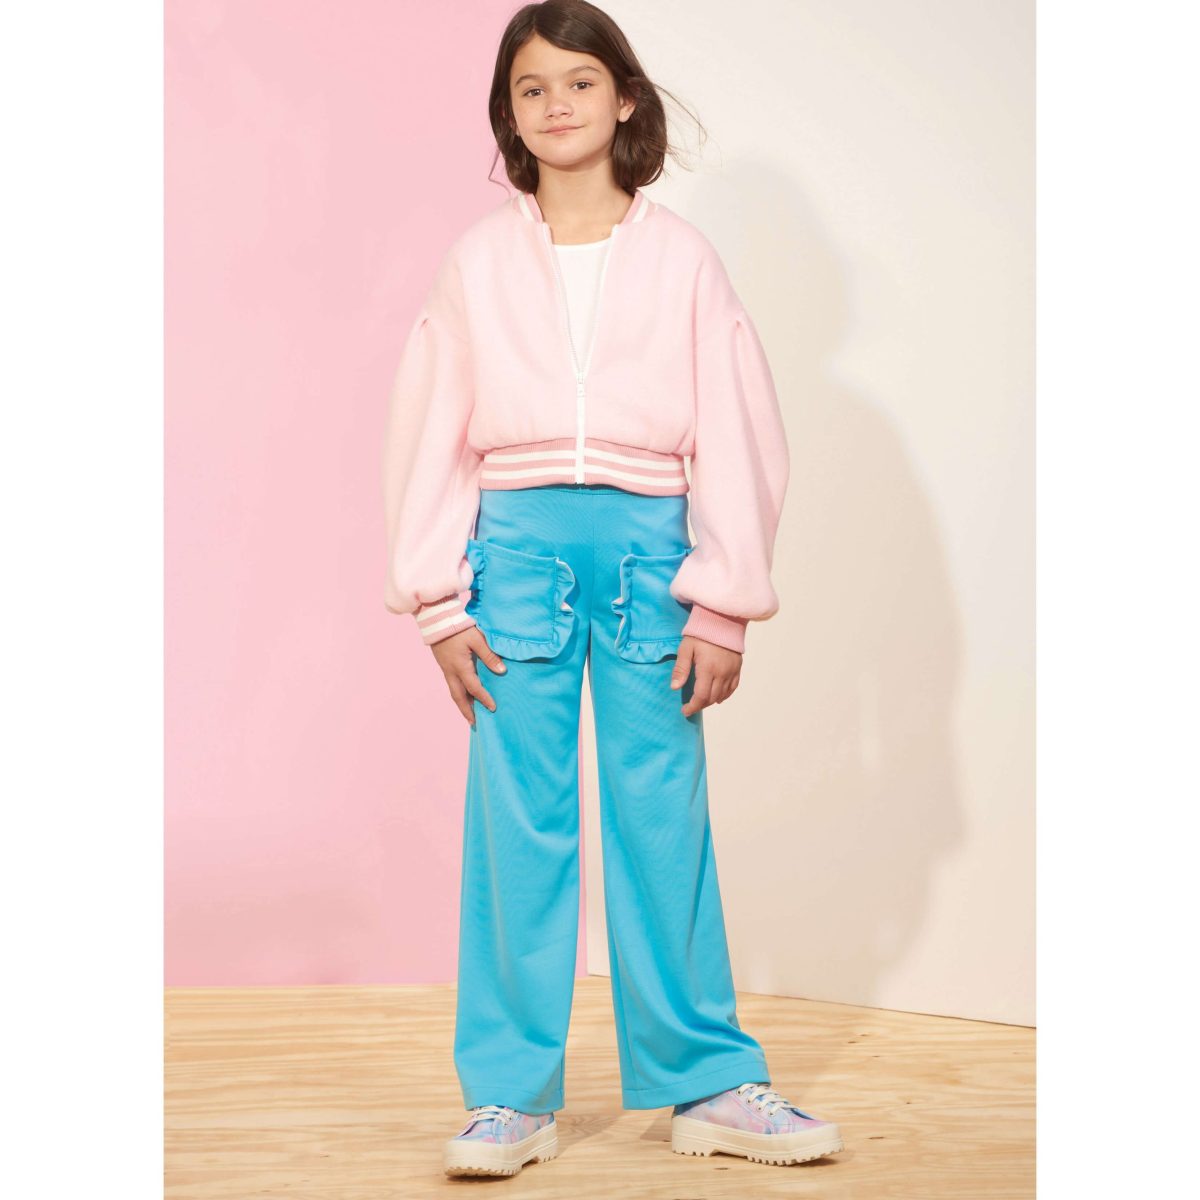 Simplicity Sewing Pattern S9654 Children's and Girls' Jacket, Trousers and Skirt